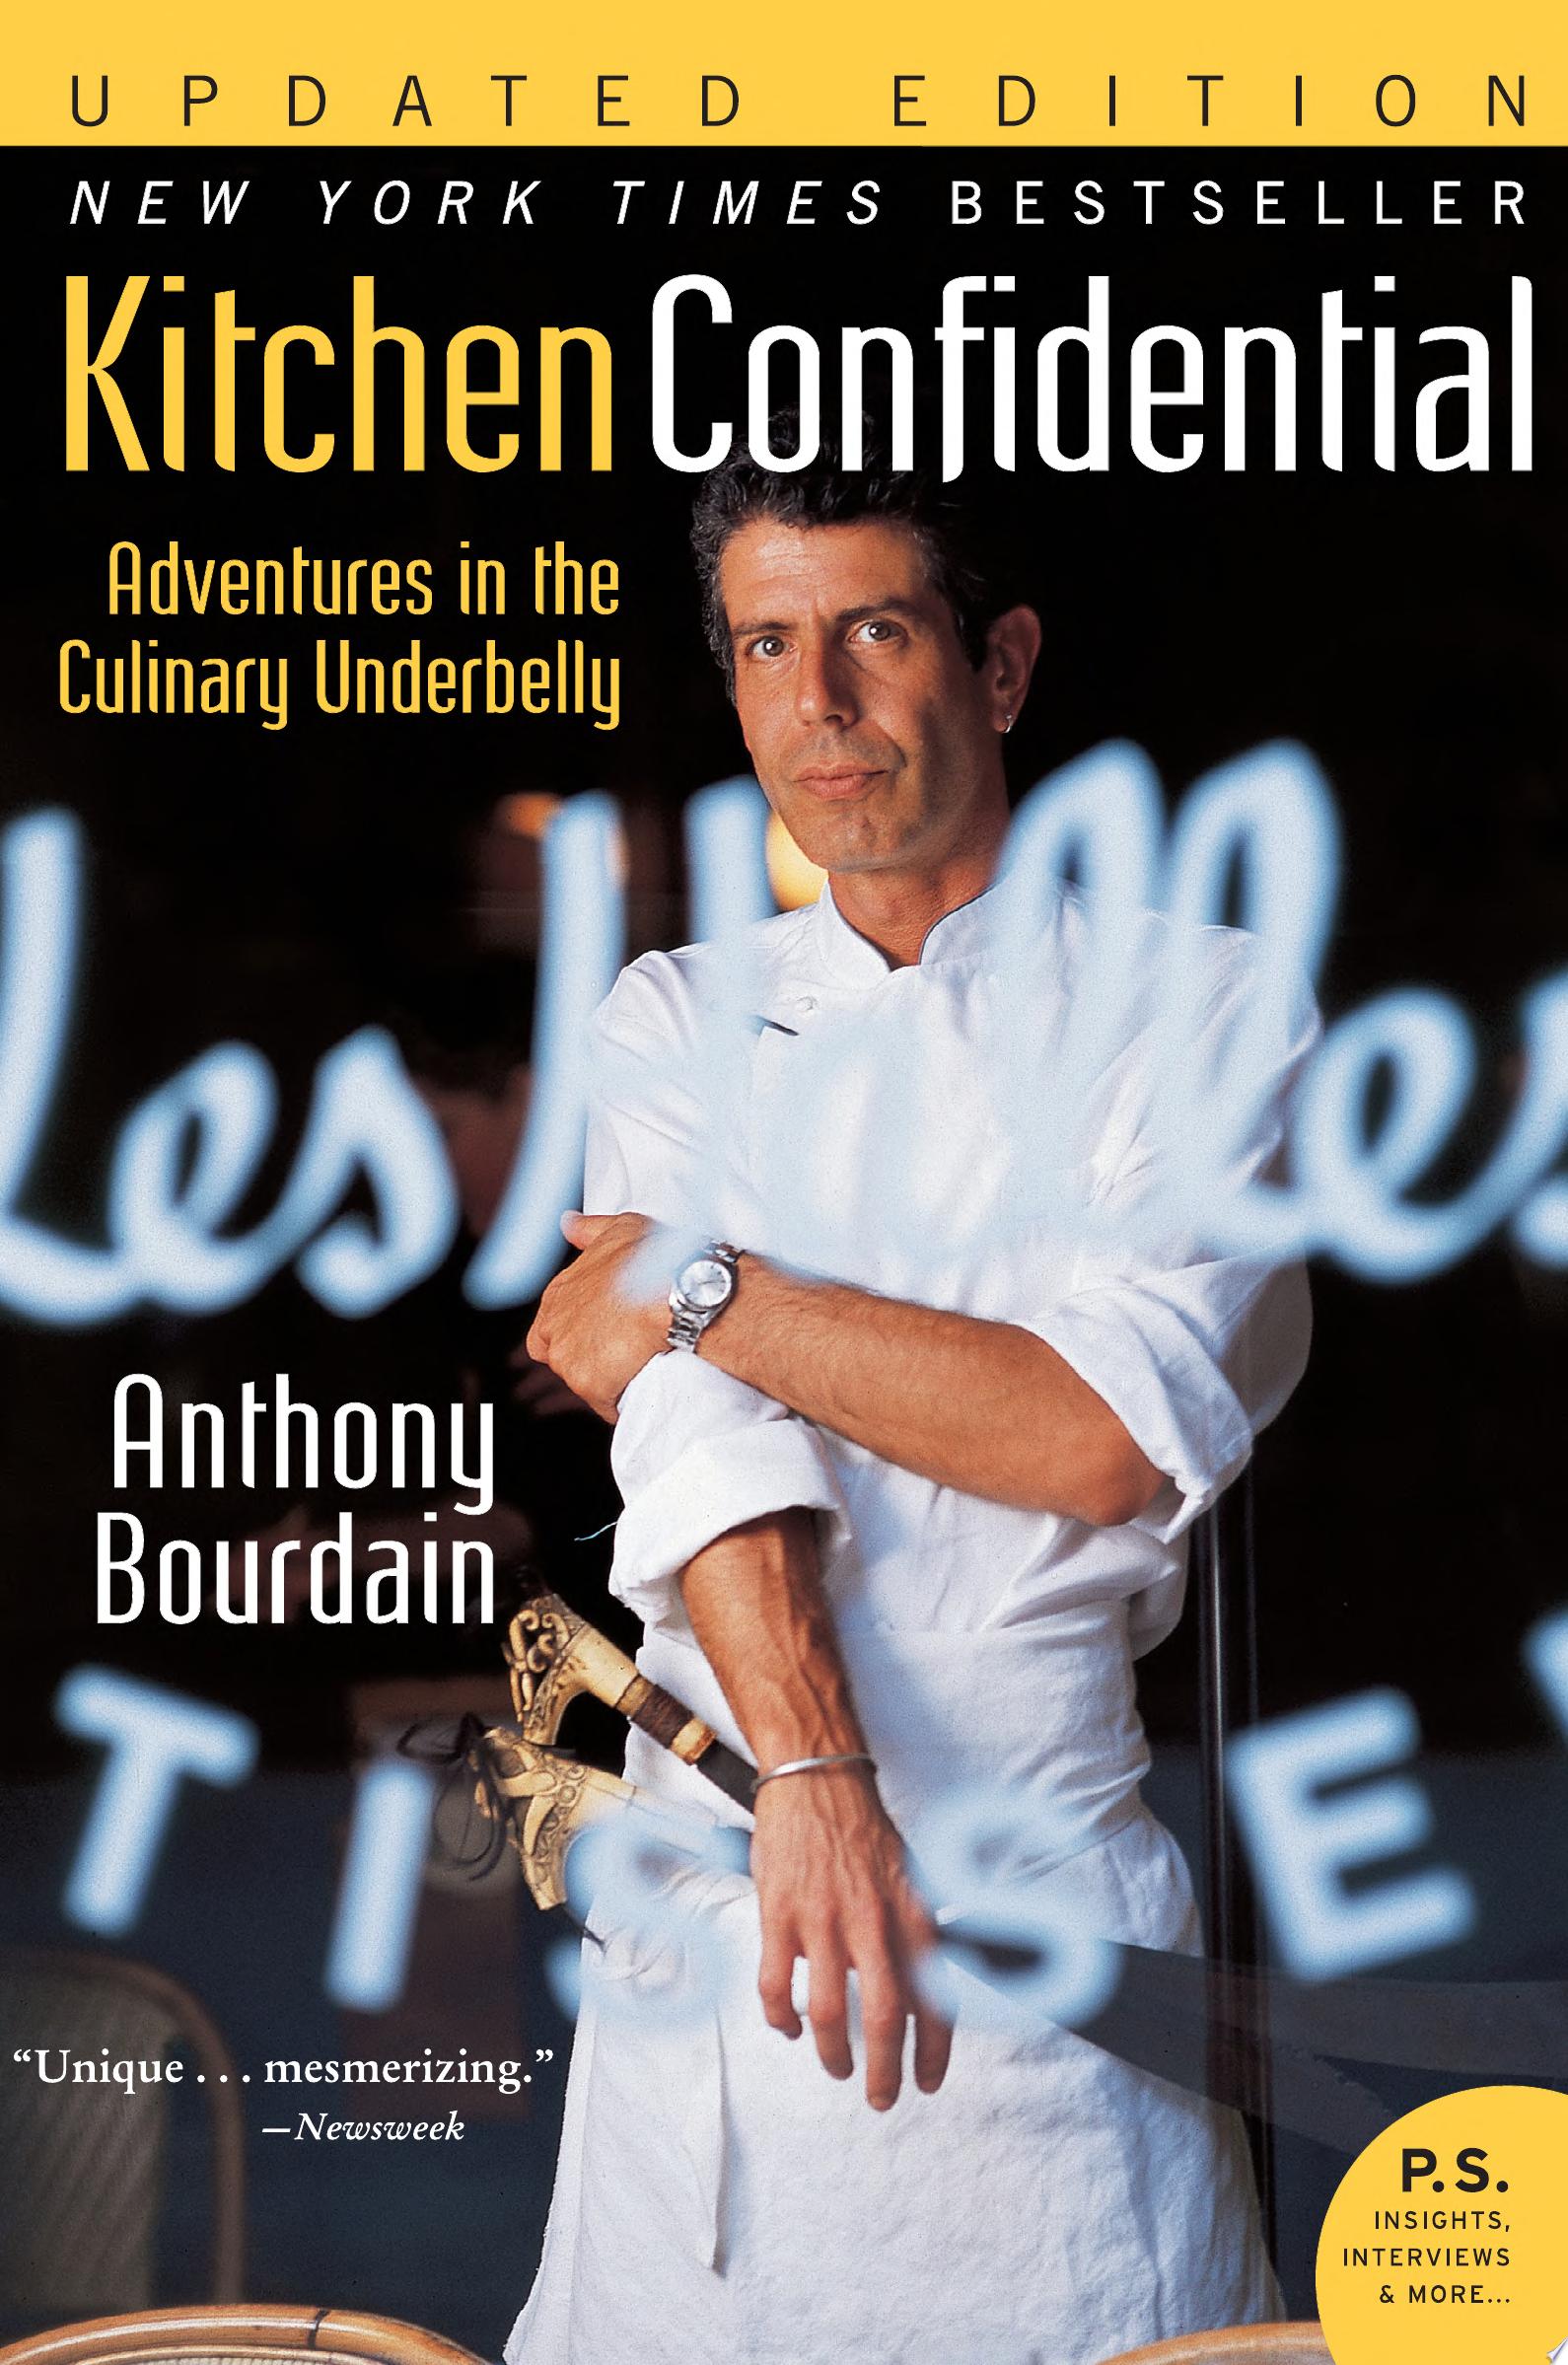 Image for "Kitchen Confidential Updated Ed"